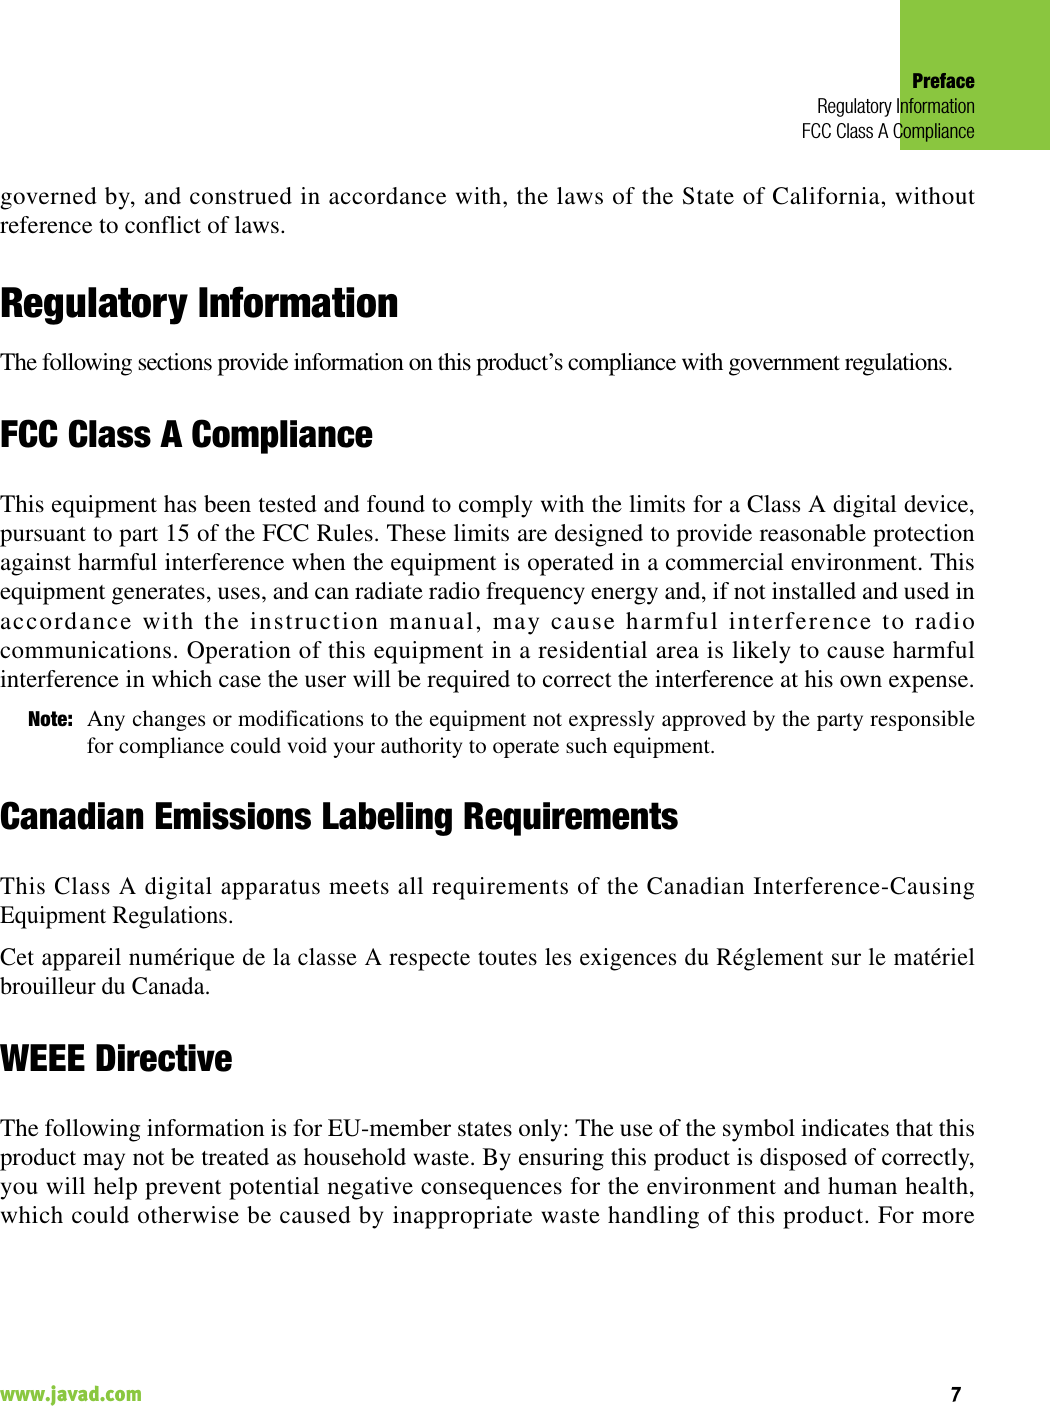 PrefaceRegulatory InformationFCC Class A Compliance7www.javad.com                                                                                                                                                    governed by, and construed in accordance with, the laws of the State of California, withoutreference to conflict of laws.Regulatory InformationThe following sections provide information on this product’s compliance with government regulations.FCC Class A ComplianceThis equipment has been tested and found to comply with the limits for a Class A digital device,pursuant to part 15 of the FCC Rules. These limits are designed to provide reasonable protectionagainst harmful interference when the equipment is operated in a commercial environment. Thisequipment generates, uses, and can radiate radio frequency energy and, if not installed and used inaccordance with the instruction manual, may cause harmful interference to radiocommunications. Operation of this equipment in a residential area is likely to cause harmfulinterference in which case the user will be required to correct the interference at his own expense.Note: Any changes or modifications to the equipment not expressly approved by the party responsiblefor compliance could void your authority to operate such equipment.Canadian Emissions Labeling RequirementsThis Class A digital apparatus meets all requirements of the Canadian Interference-CausingEquipment Regulations.Cet appareil numérique de la classe A respecte toutes les exigences du Réglement sur le matérielbrouilleur du Canada.WEEE DirectiveThe following information is for EU-member states only: The use of the symbol indicates that thisproduct may not be treated as household waste. By ensuring this product is disposed of correctly,you will help prevent potential negative consequences for the environment and human health,which could otherwise be caused by inappropriate waste handling of this product. For more